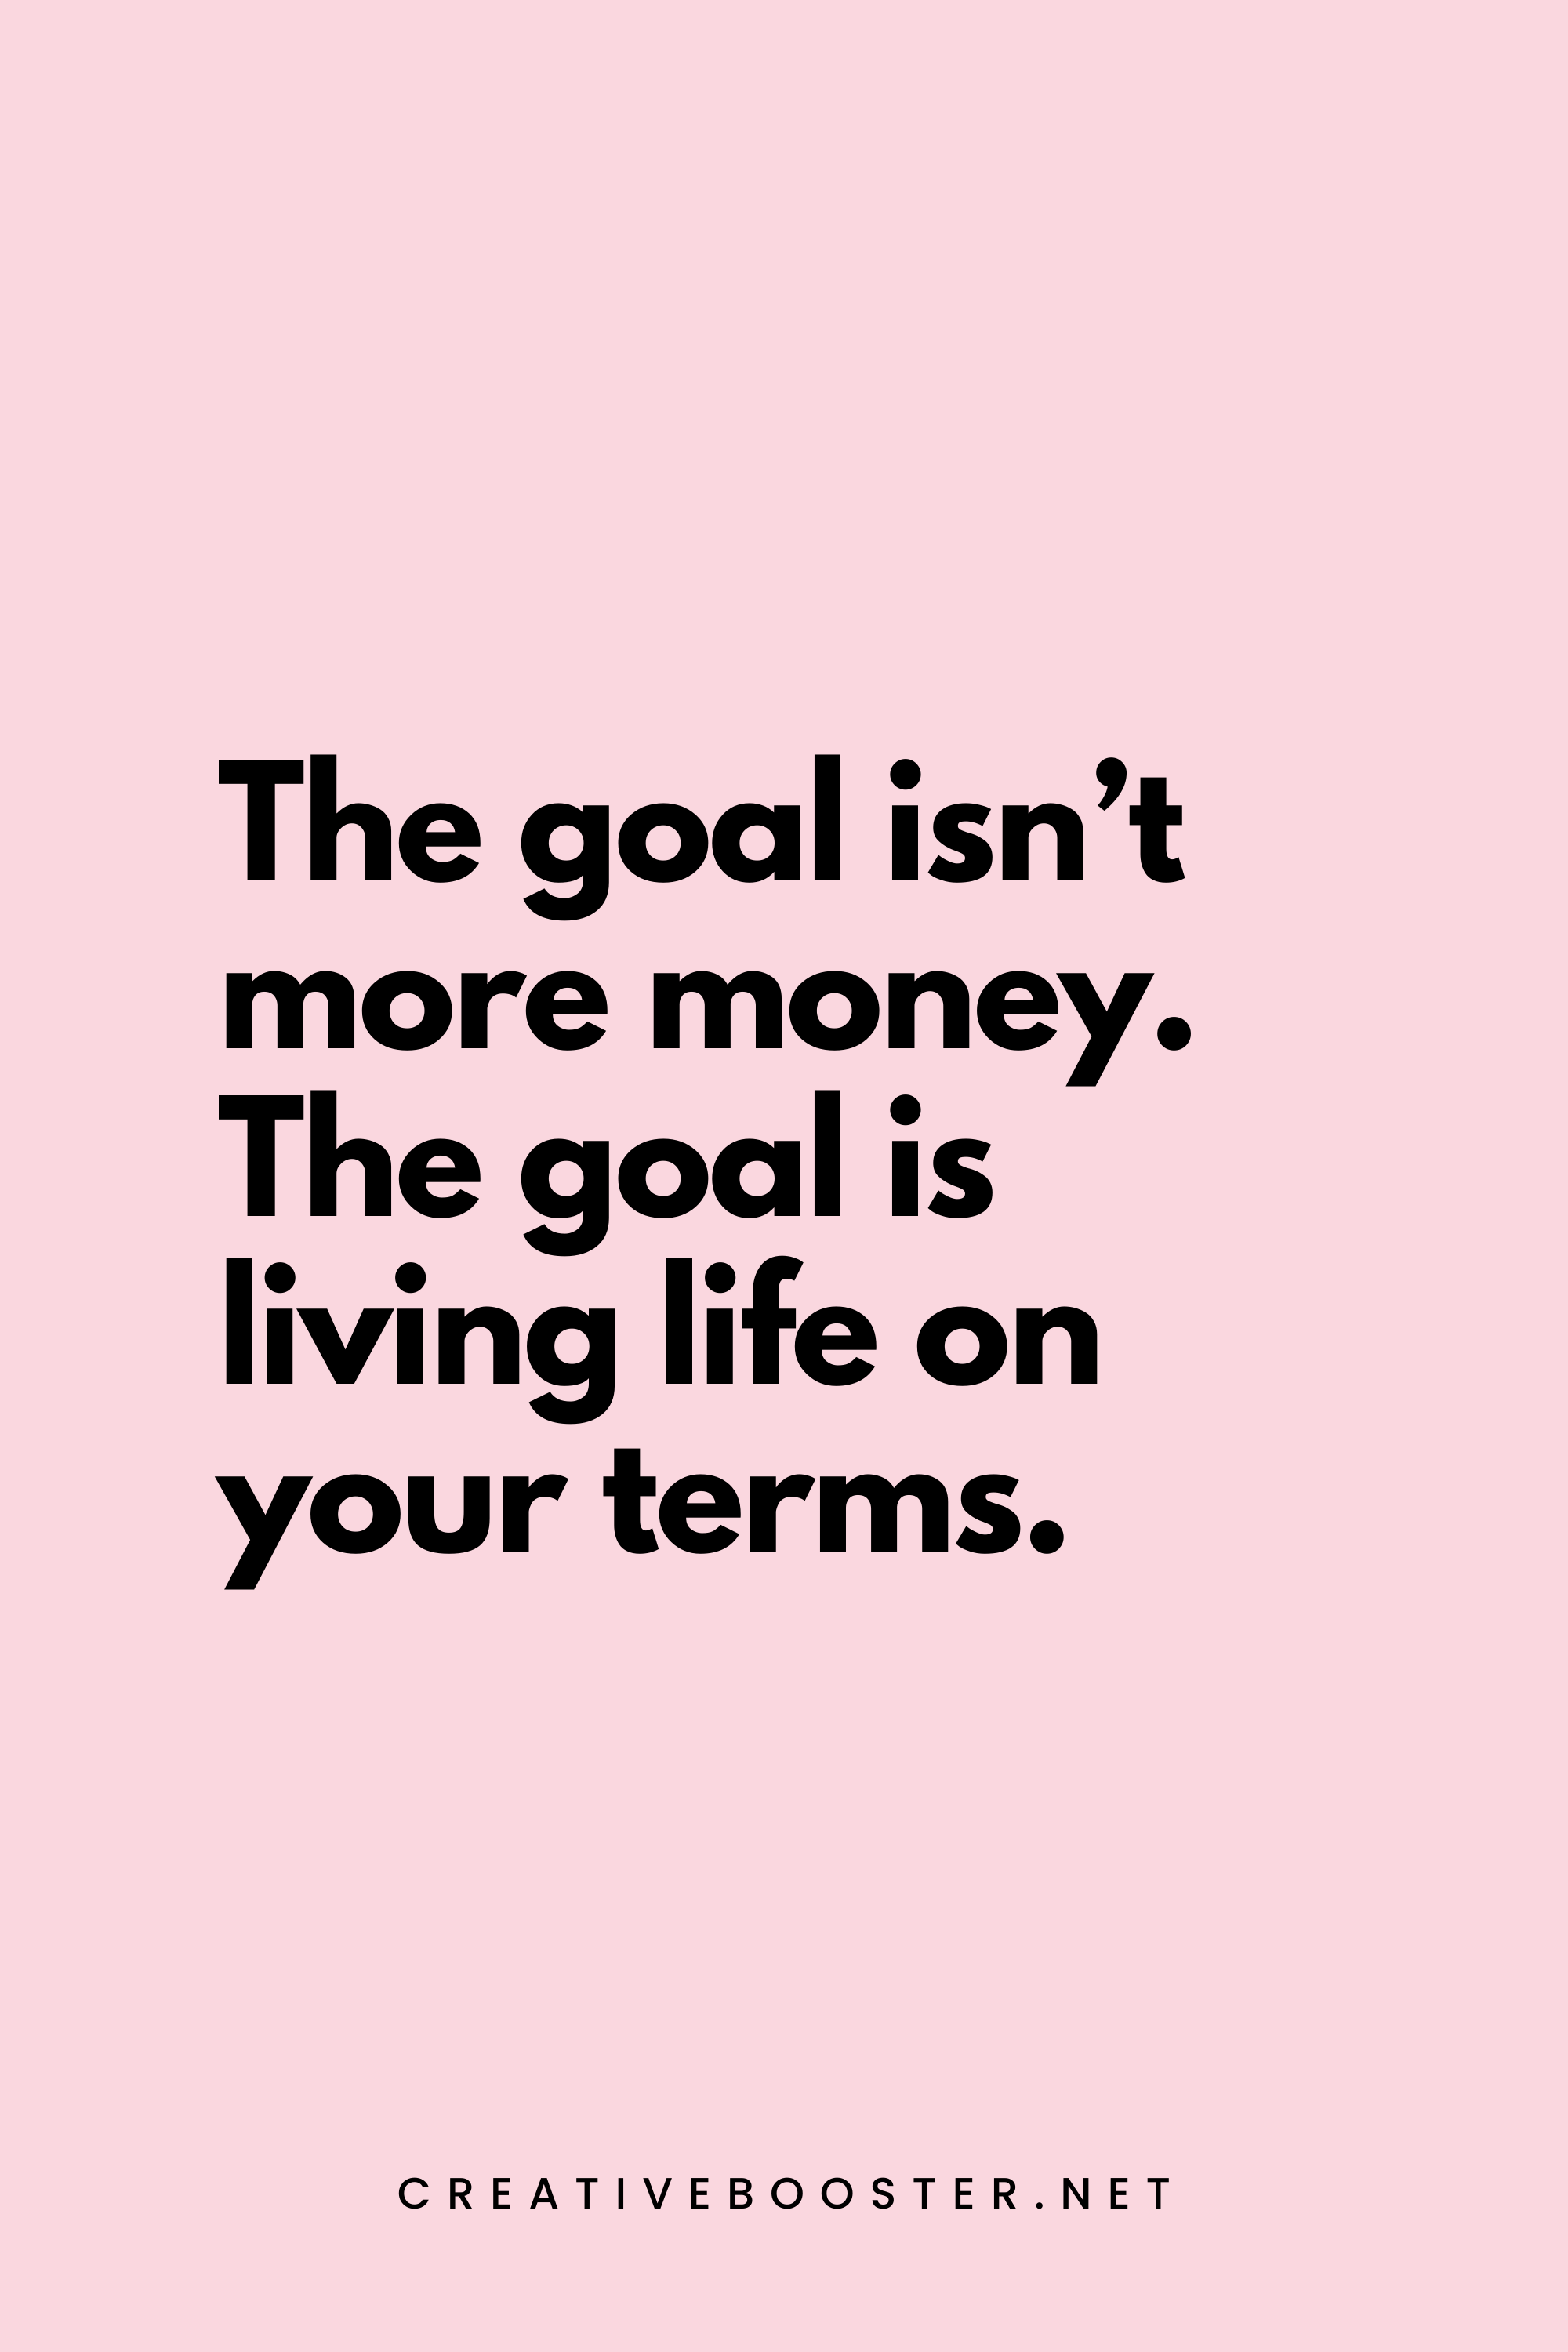 4. The goal isn’t more money. The goal is living life on your terms. - Chris Brogan - 1. Popular Financial Freedom Quotes